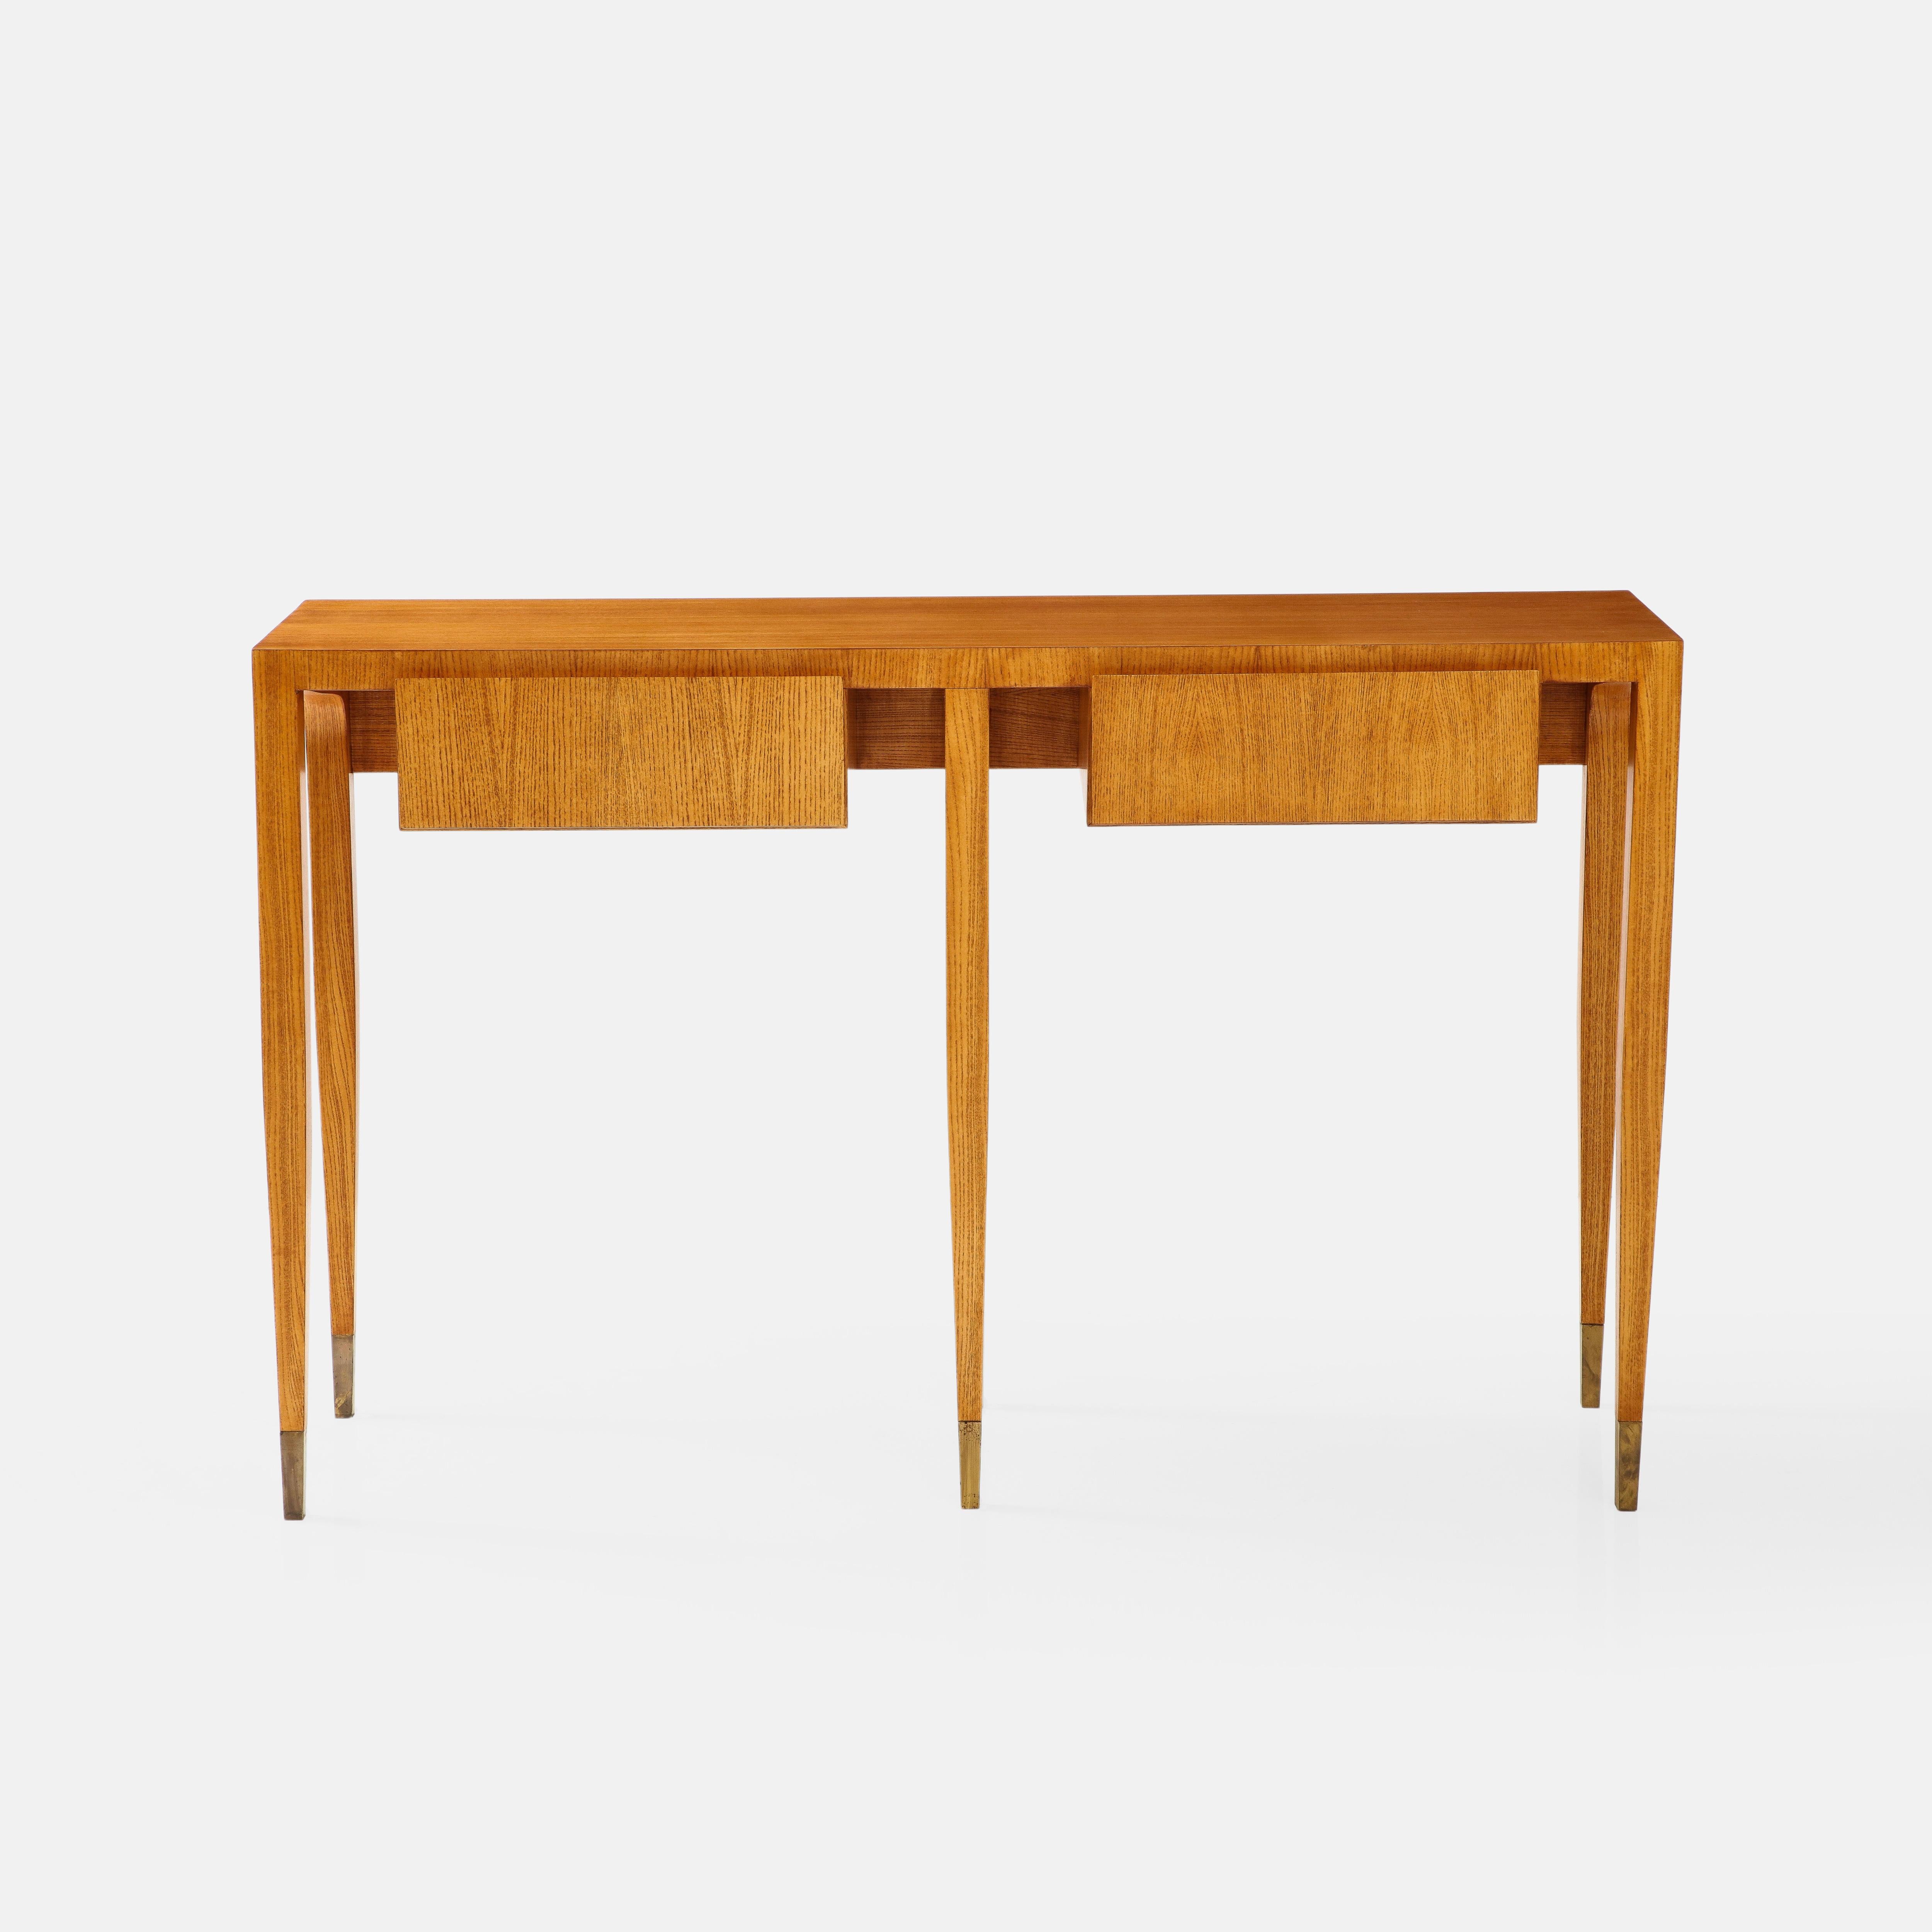 Italian Gio Ponti for Giordano Chiesa Rare Pair of Ash Wood Consoles, Italy, 1950s For Sale